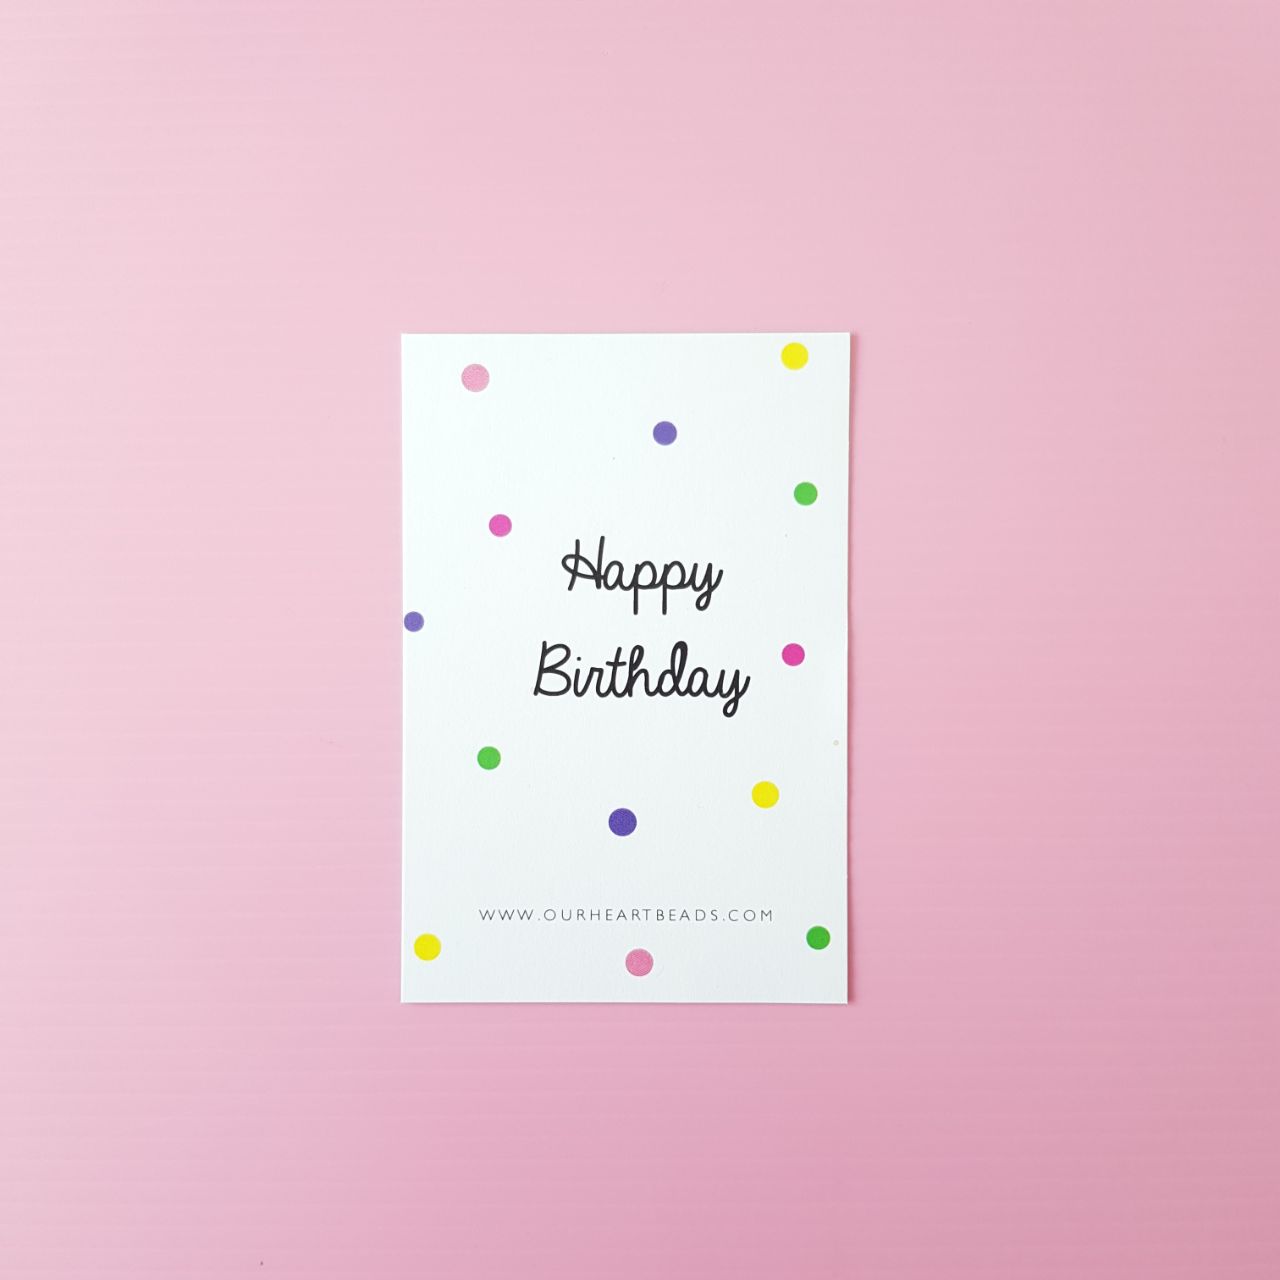 Greeting Cards (A set of 6 Cards)